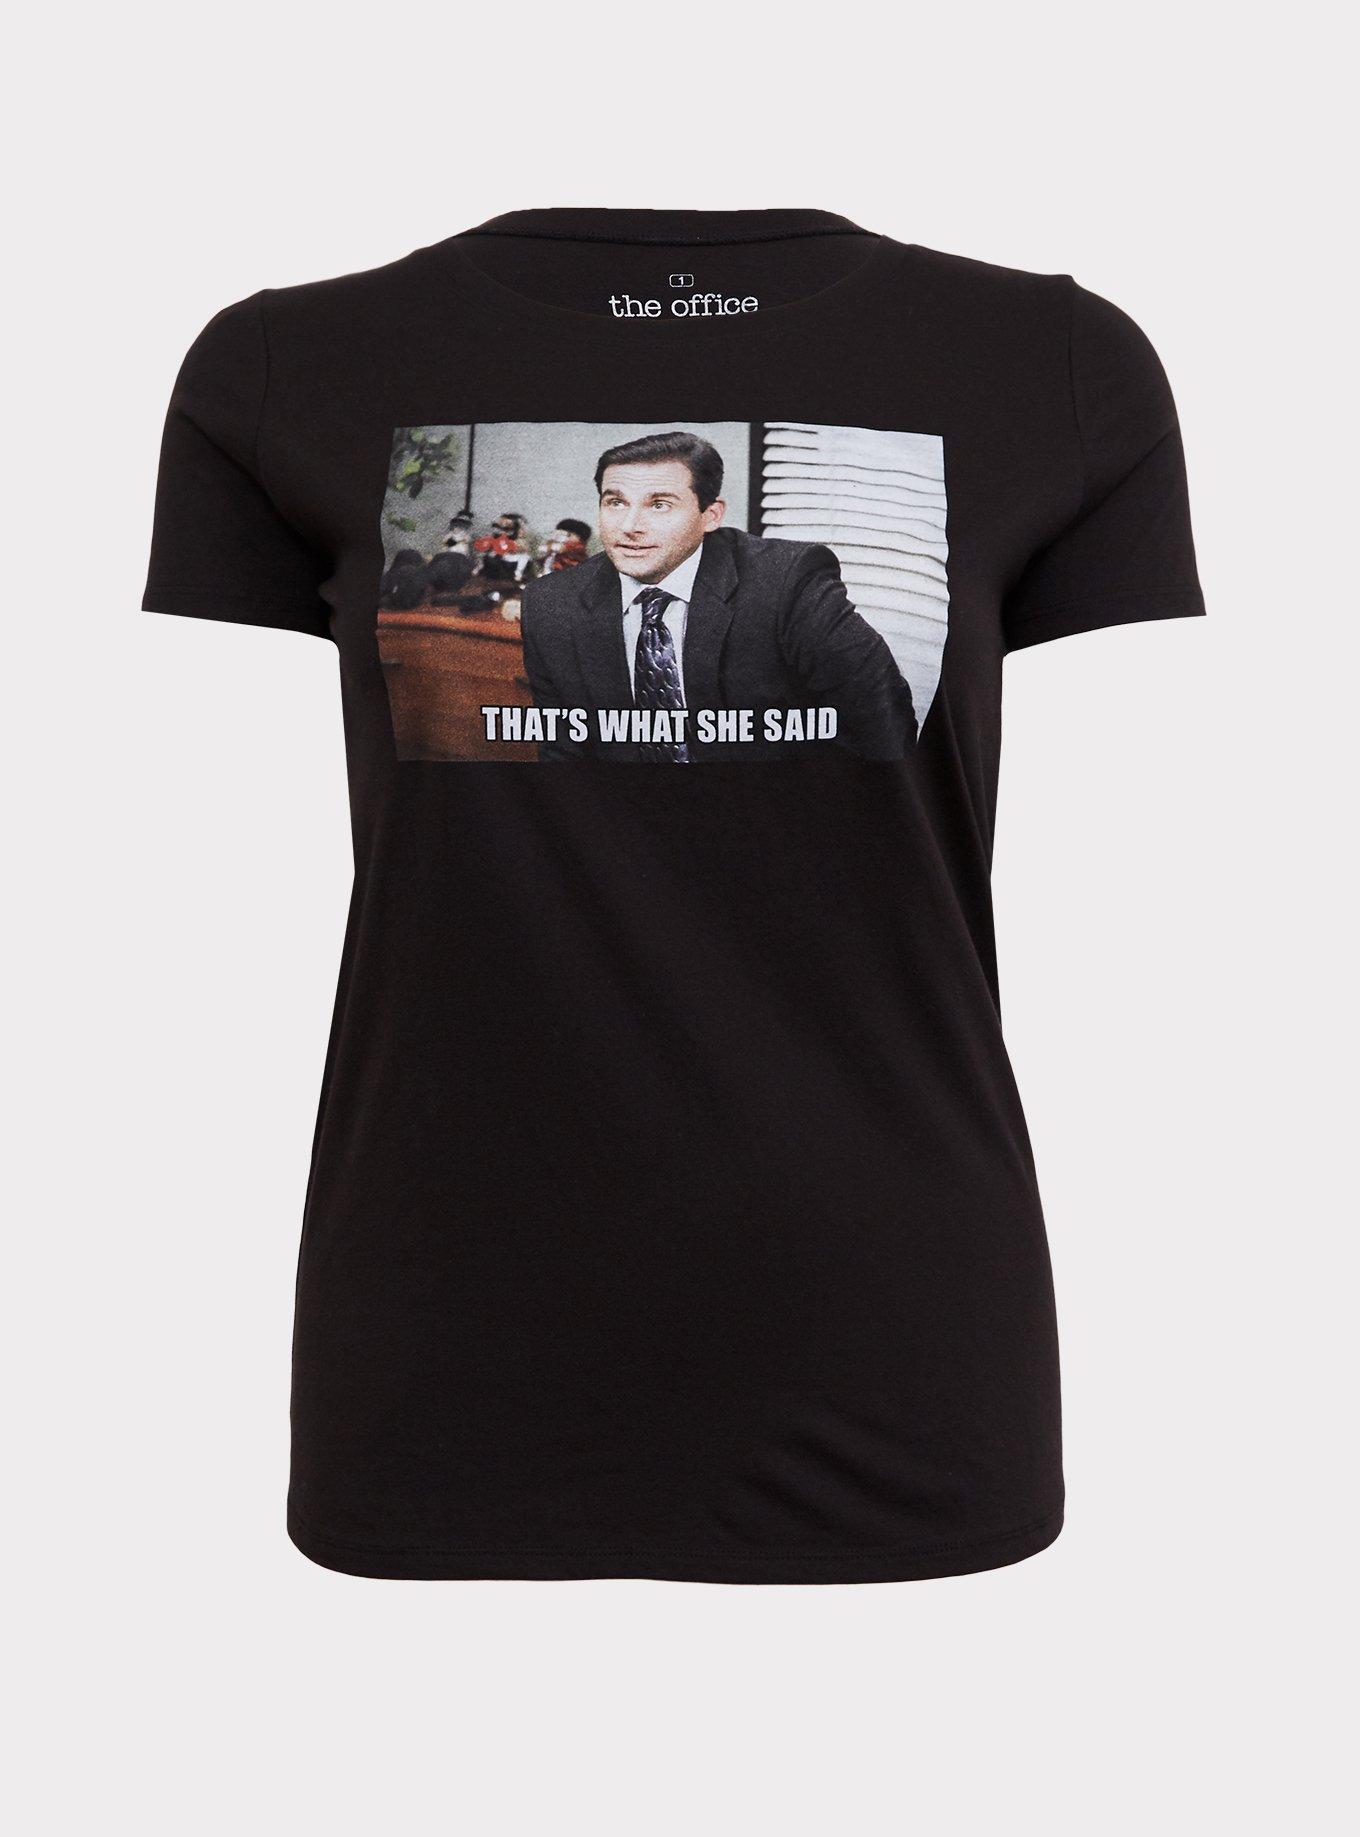 Plus Size - The Office That's What She Said Black Slim Fit Crew Tee ...